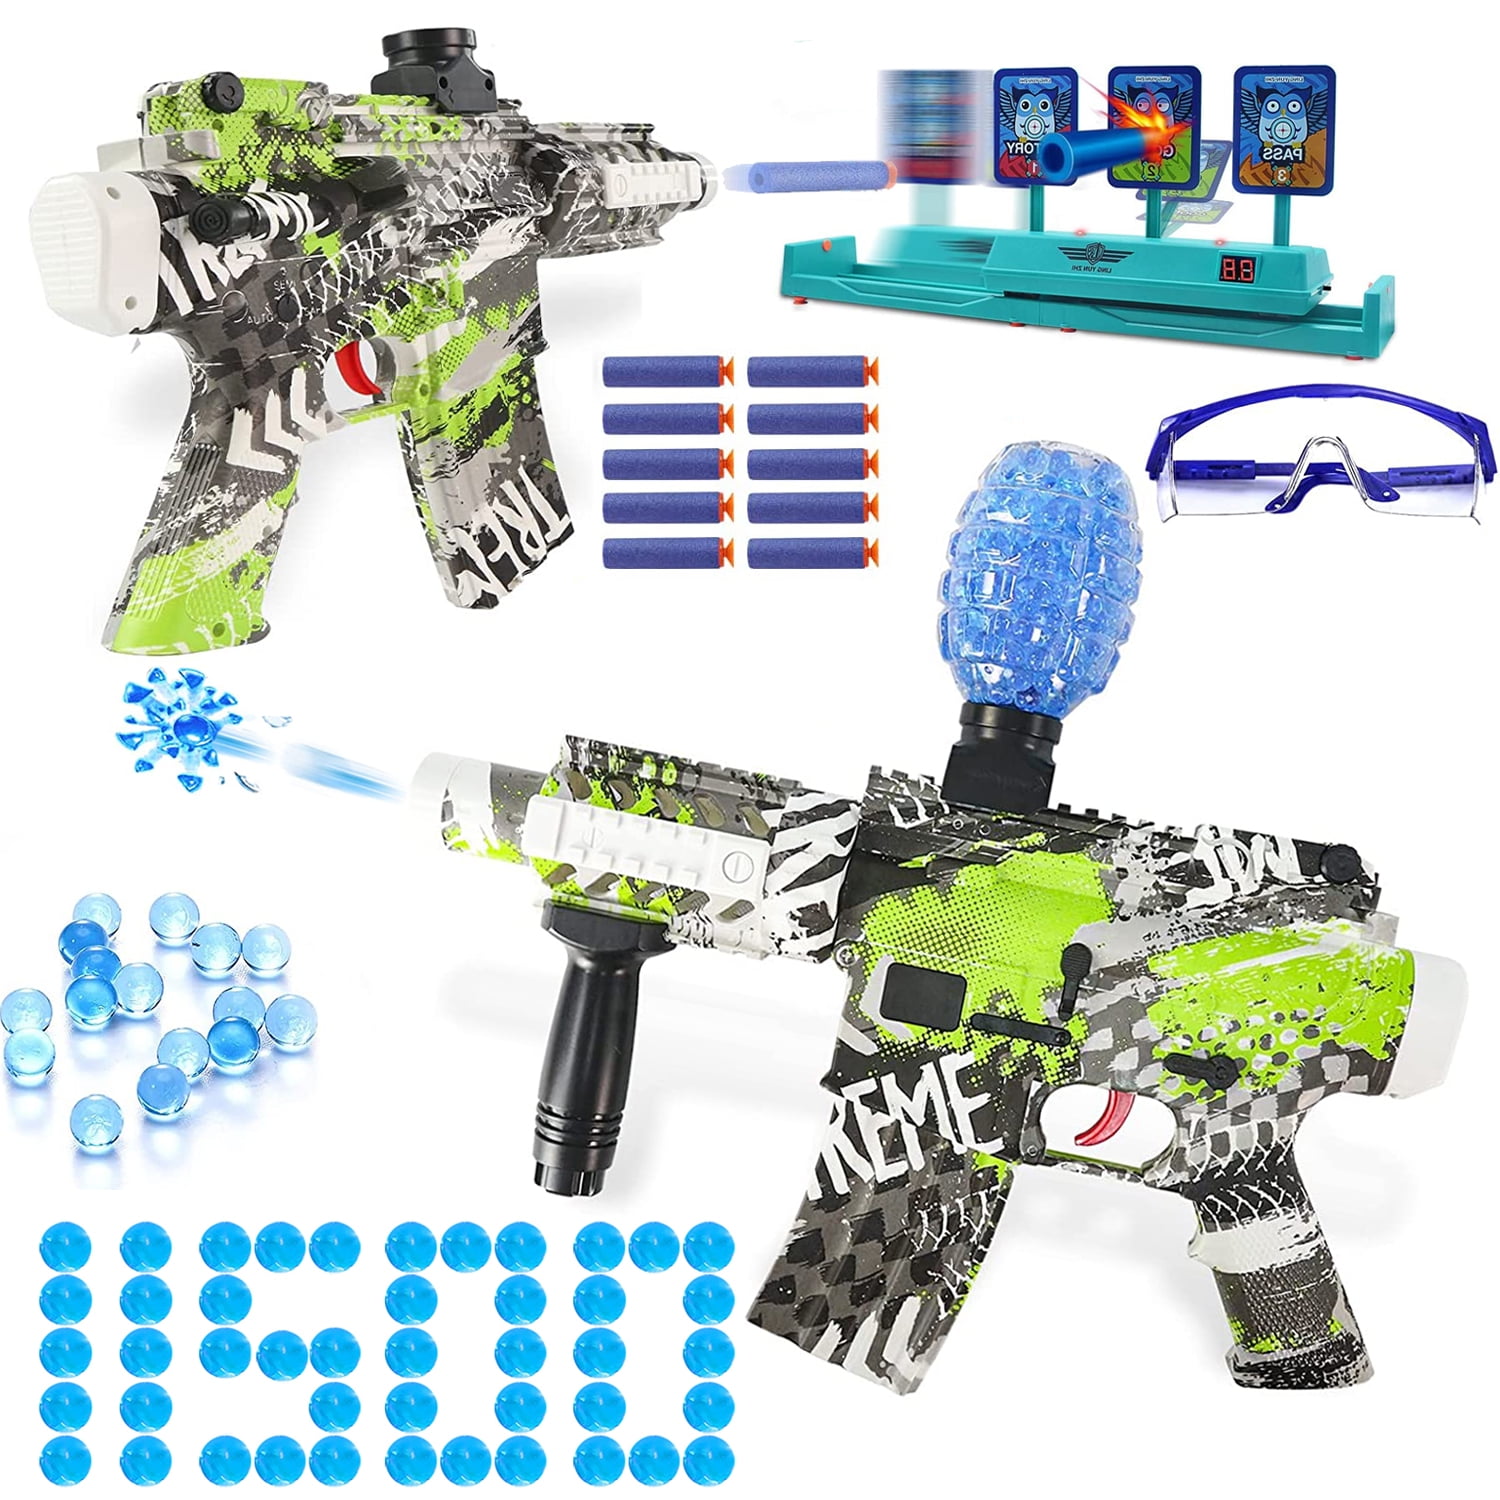 Plastic M4A1 Rifle Toy Crystal Ball Water Bullet Toy Gun Gel Blaster Kid's Gifts 